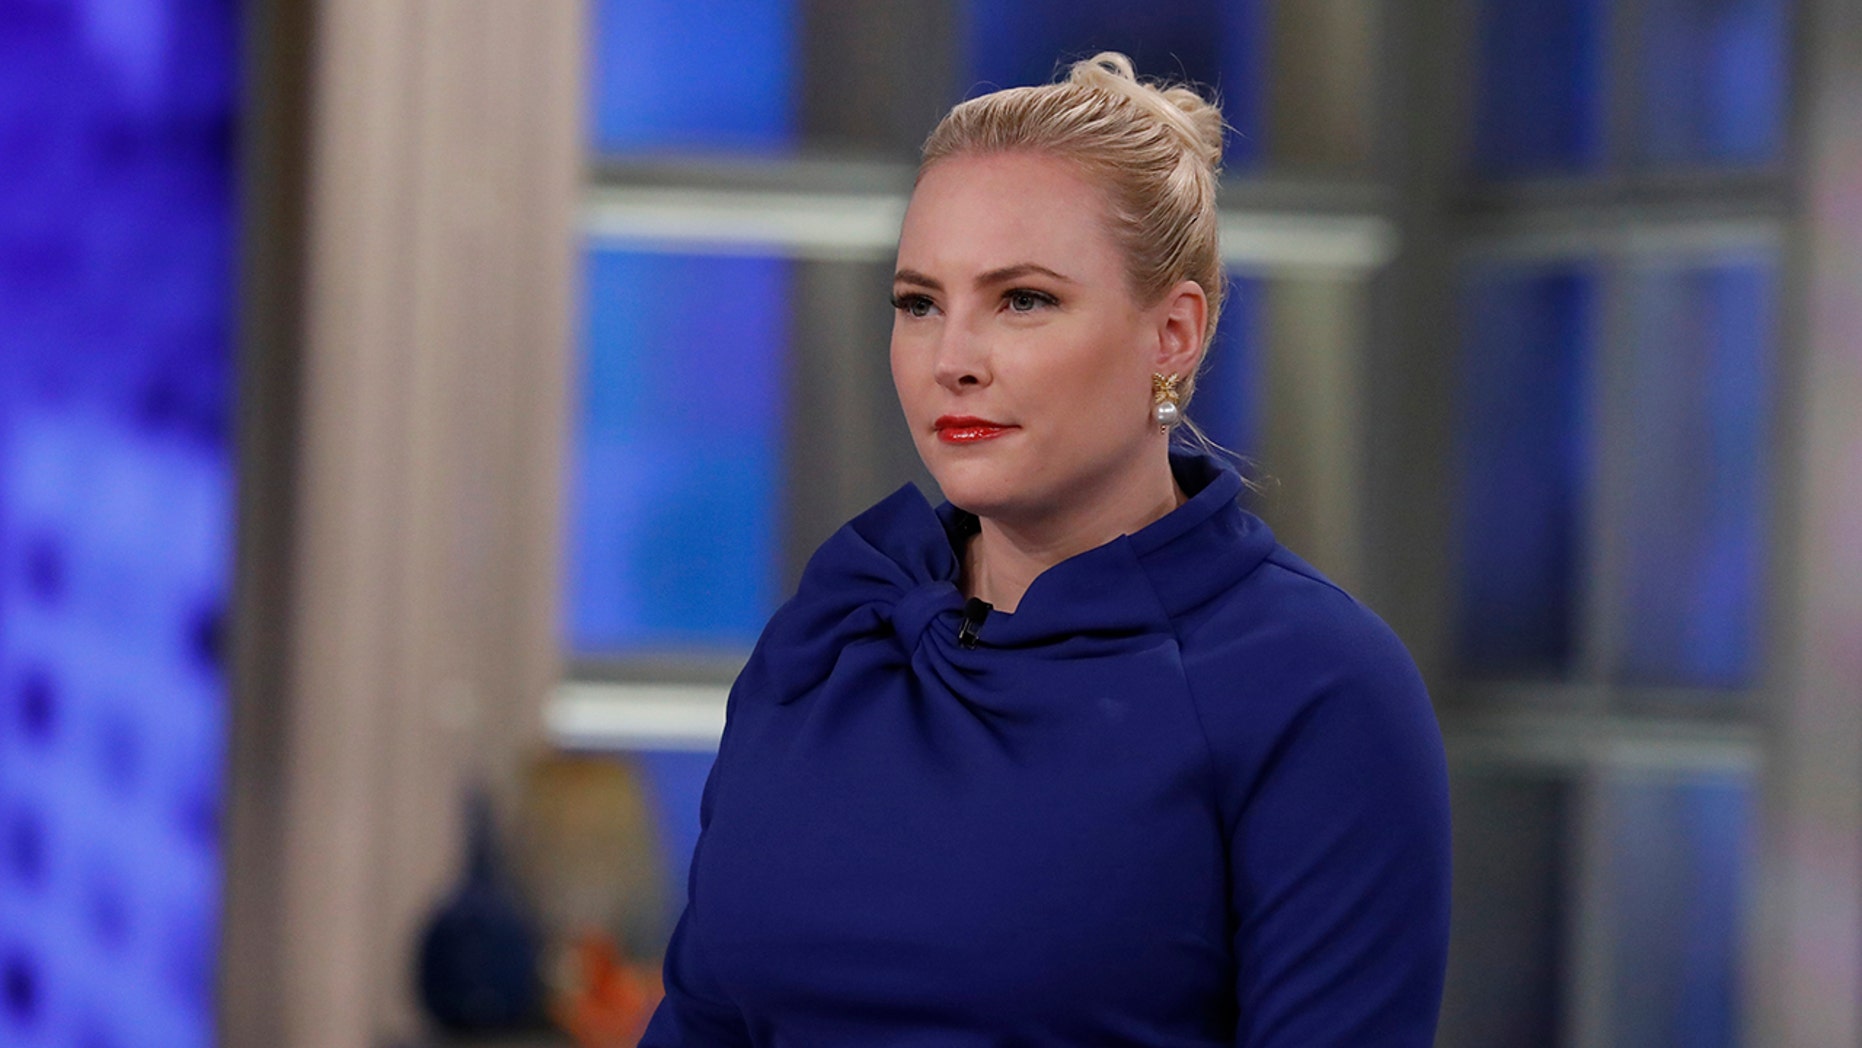 "The View" co-host, Meghan McCain, invented a viral same Tuesday by delivering a comment to a critic on Twitter.